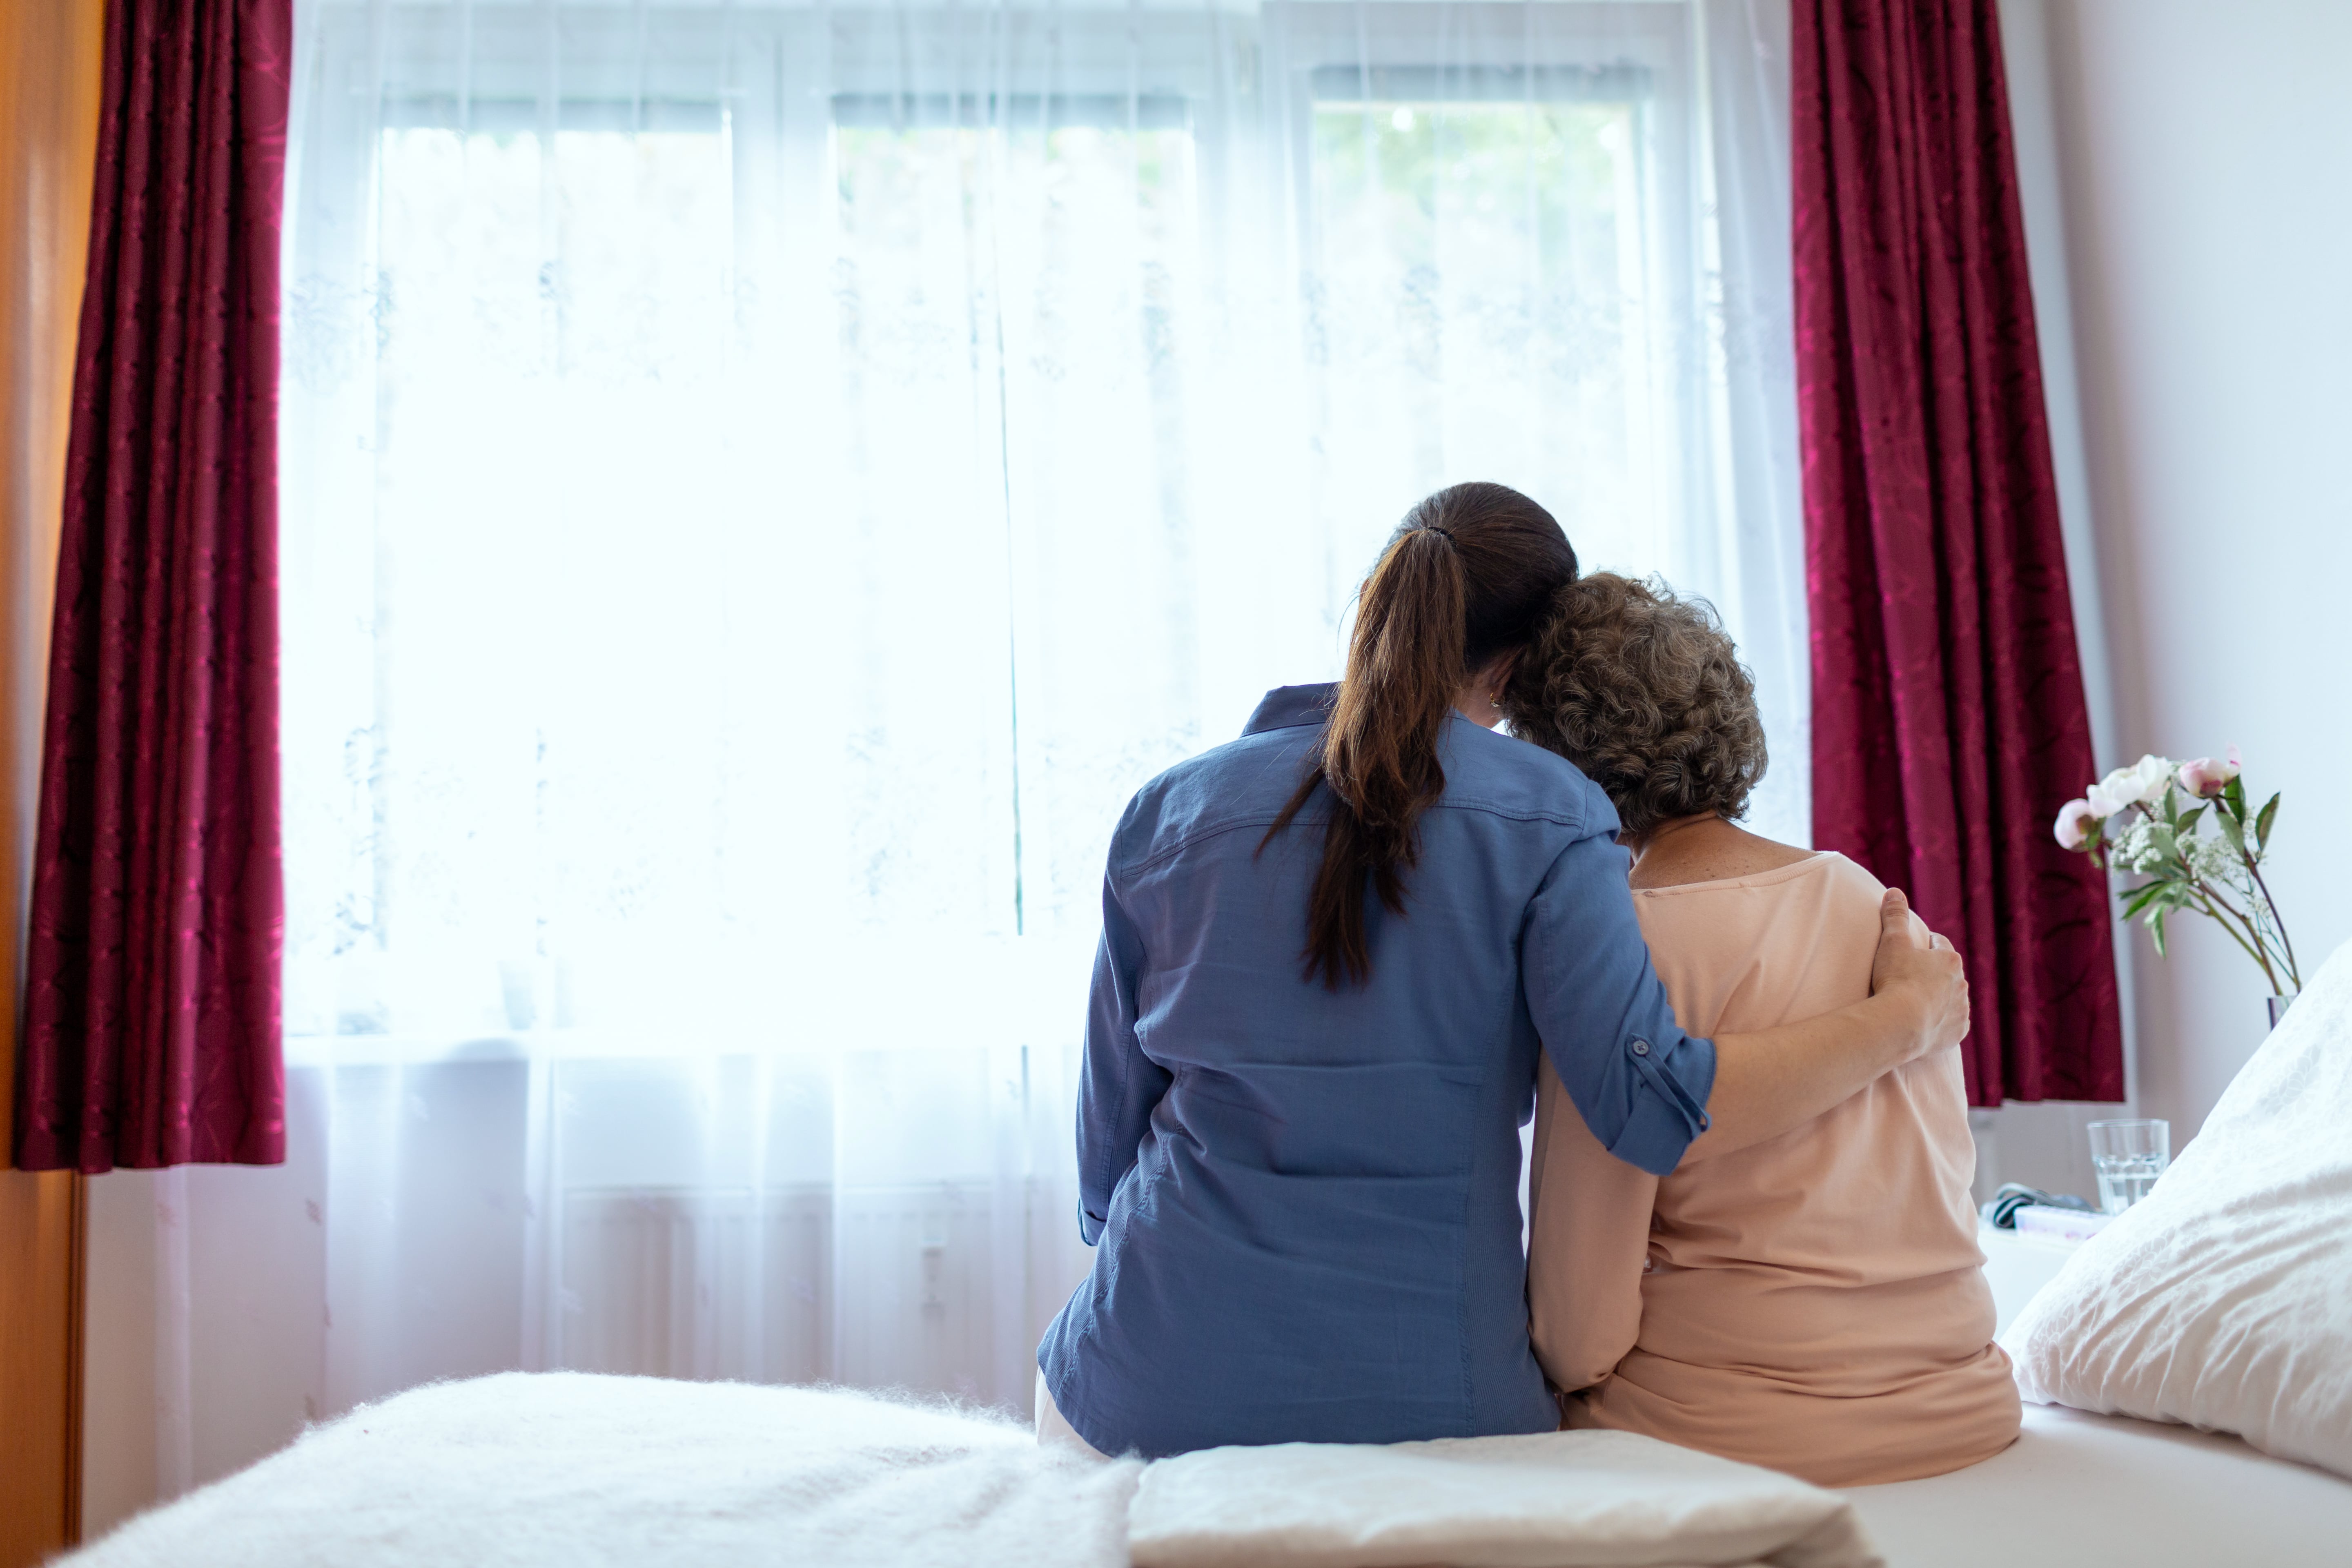 A back view of a caregiver and older loved one embracing while sitting on a bed